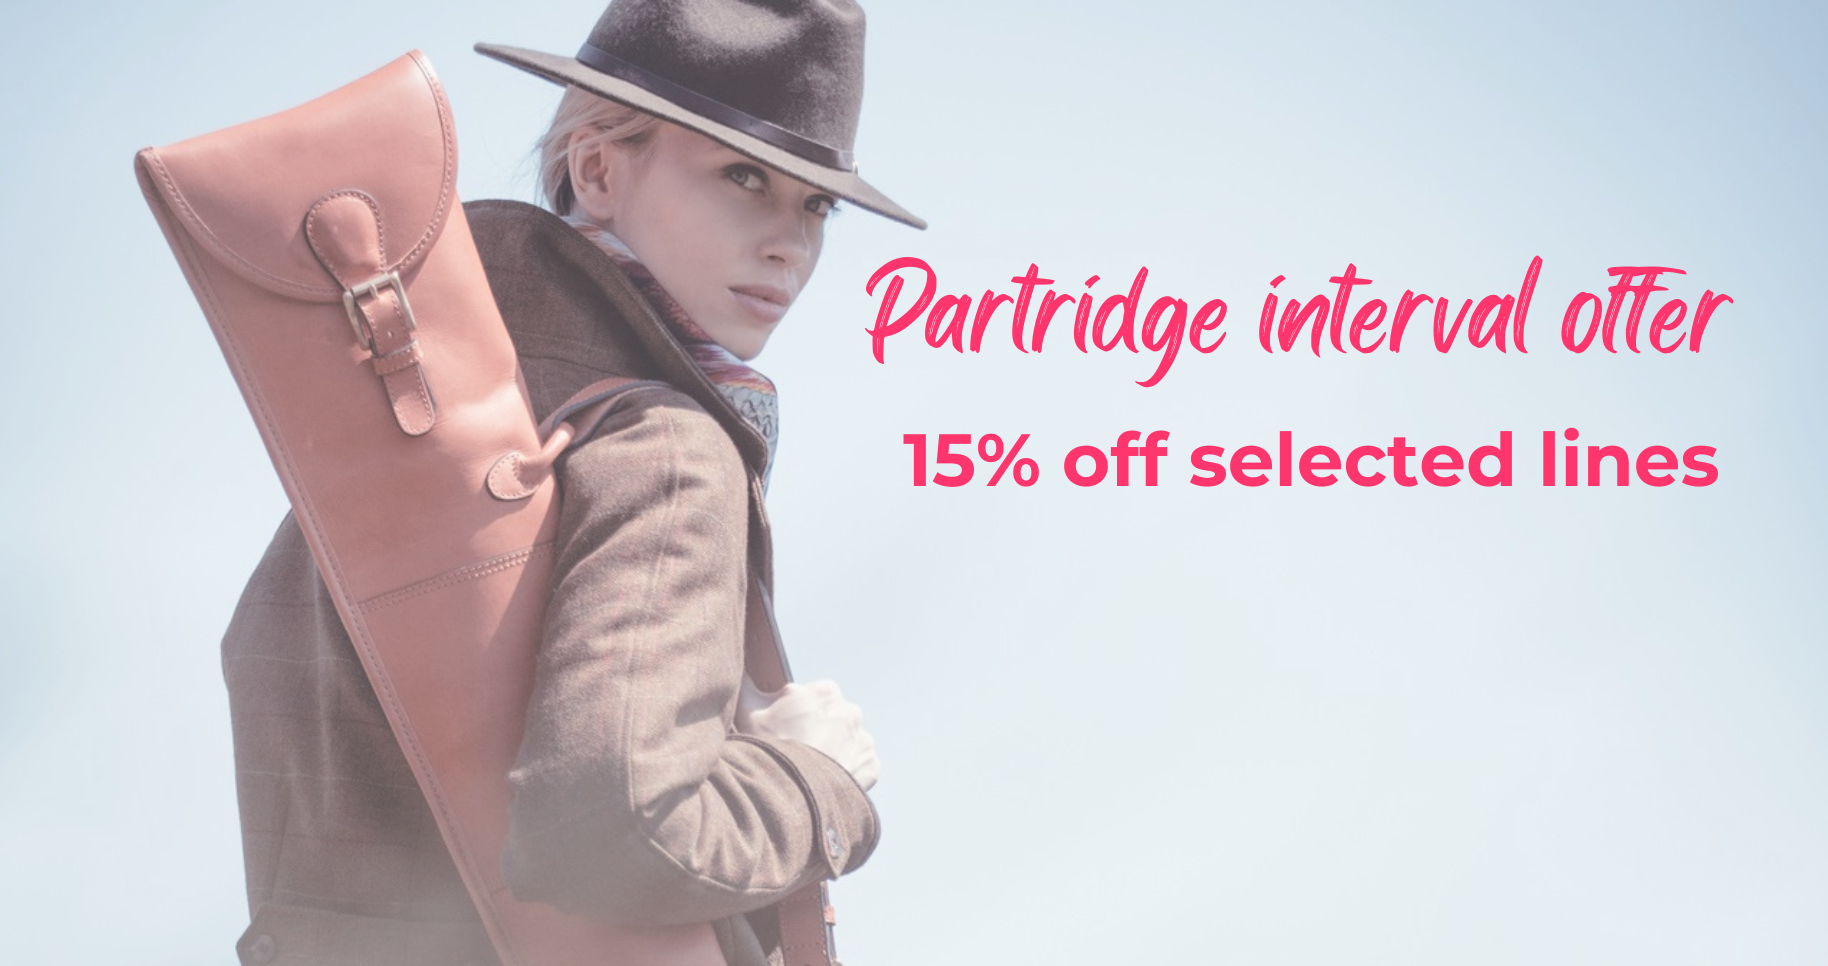 Partridge interval offer 